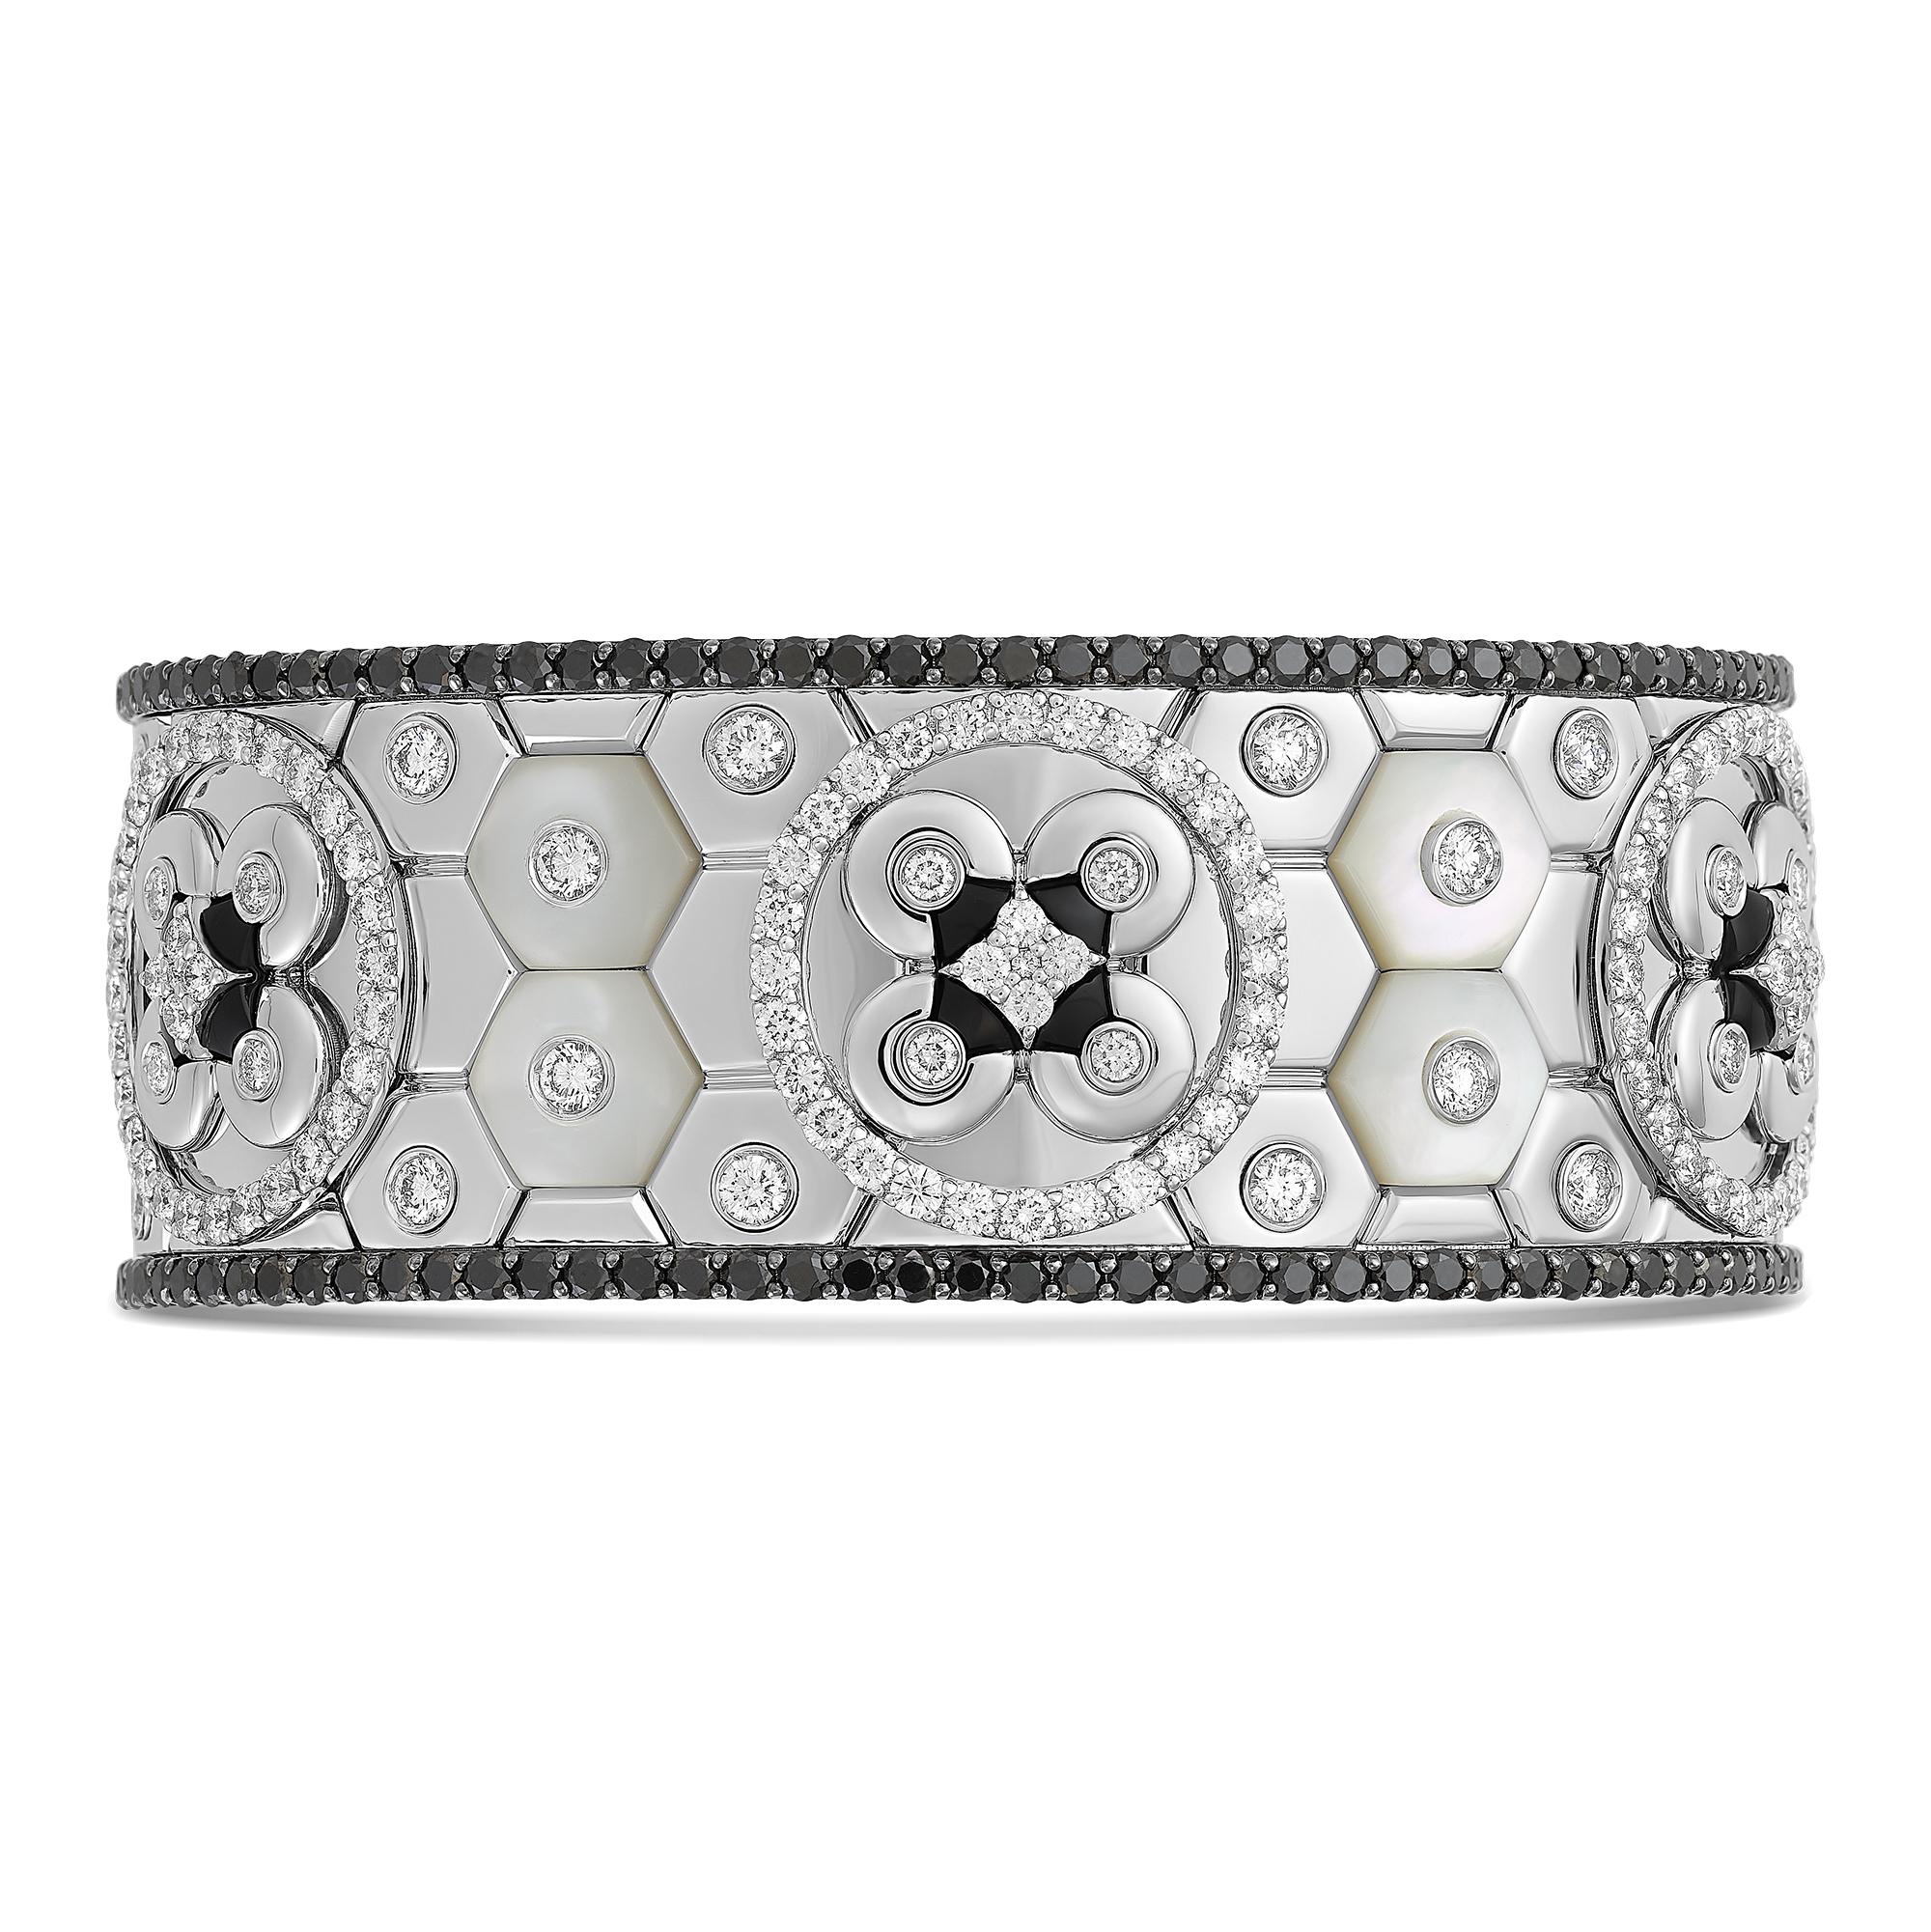 Bracelet in 18K white gold (approx. 114.23 grams) with white and black diamonds (approx. 11.12 carats) , mother of pearl and onyx (approx. 3.70 grams). Inspired by the polychrome mosaics now submerged in Capo Miseno's bay near Naples, Italy.

From